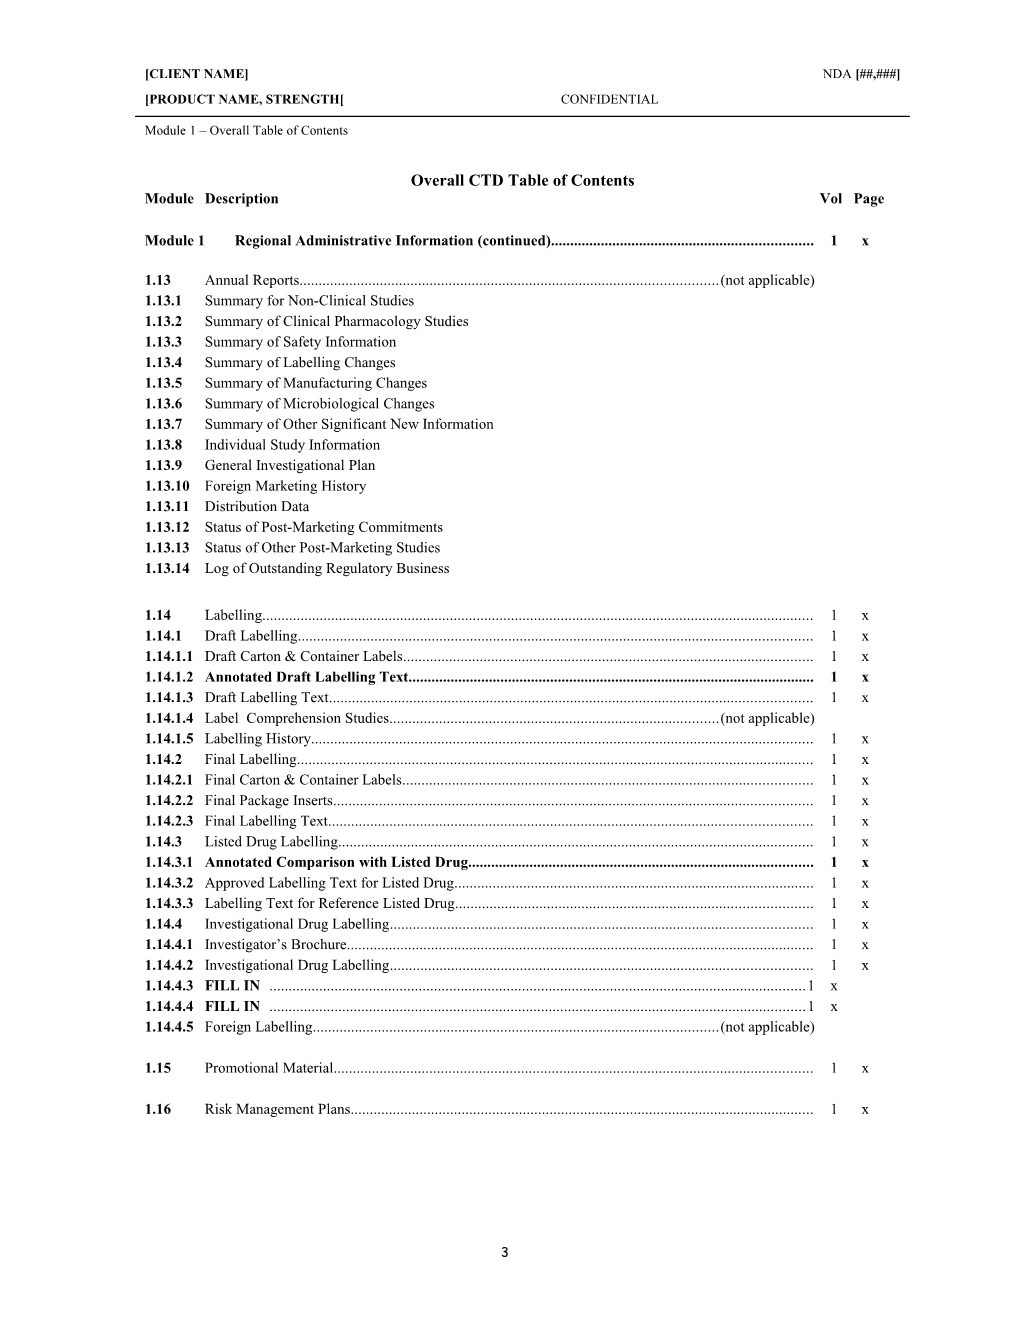 CTD - Overall Table of Contents (Template)